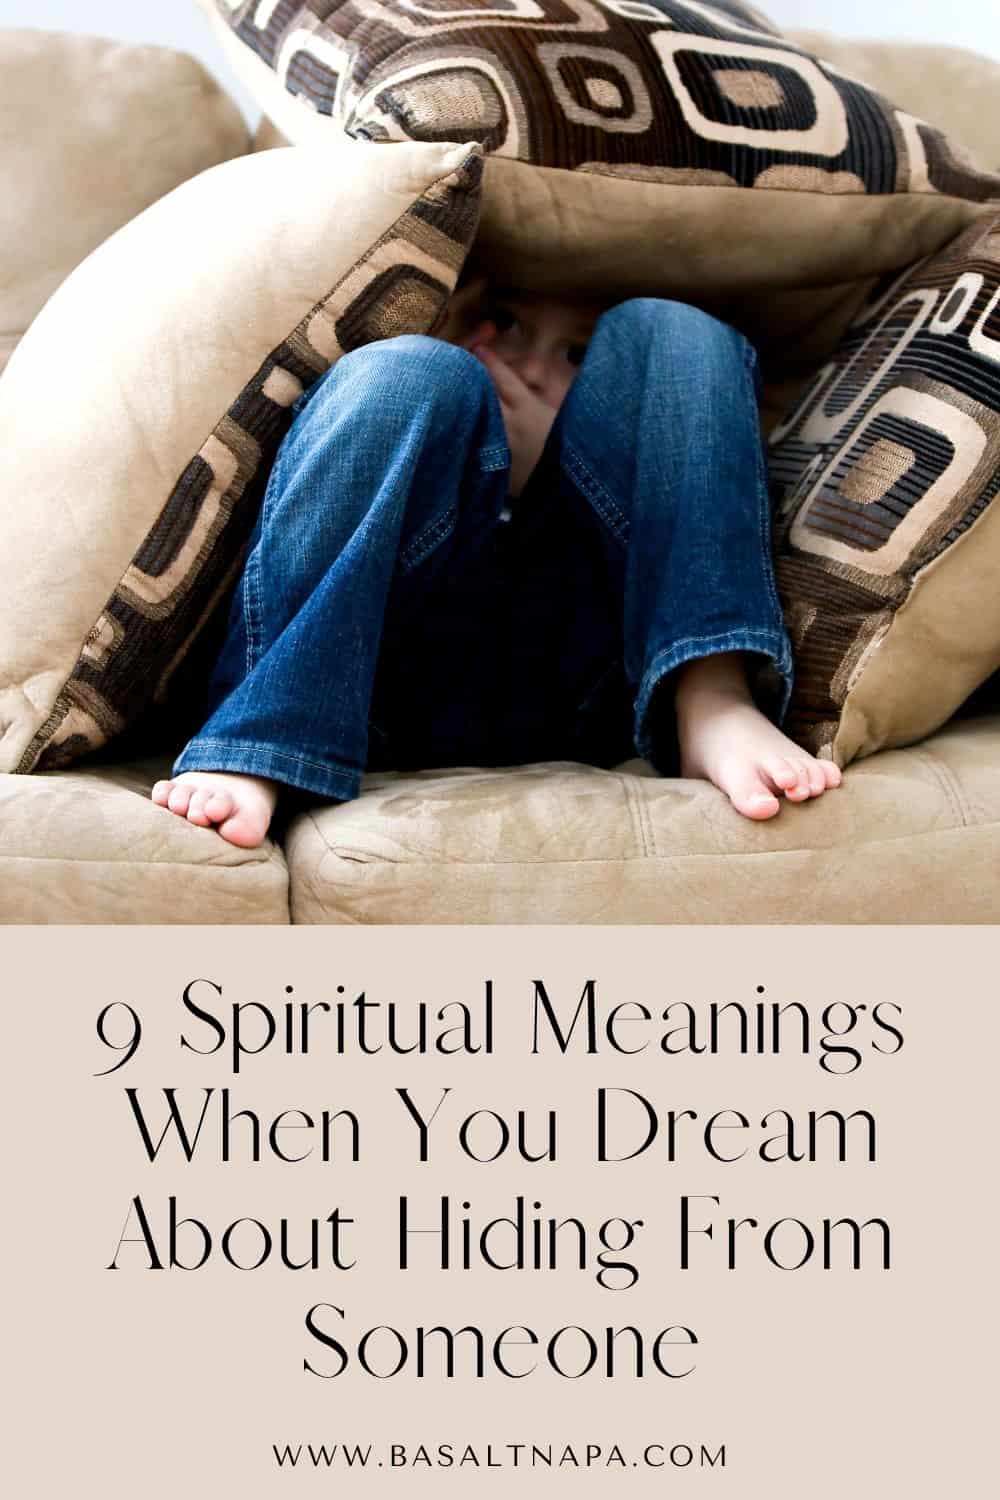 9 Spiritual Meanings When You Dream About Hiding From Someone